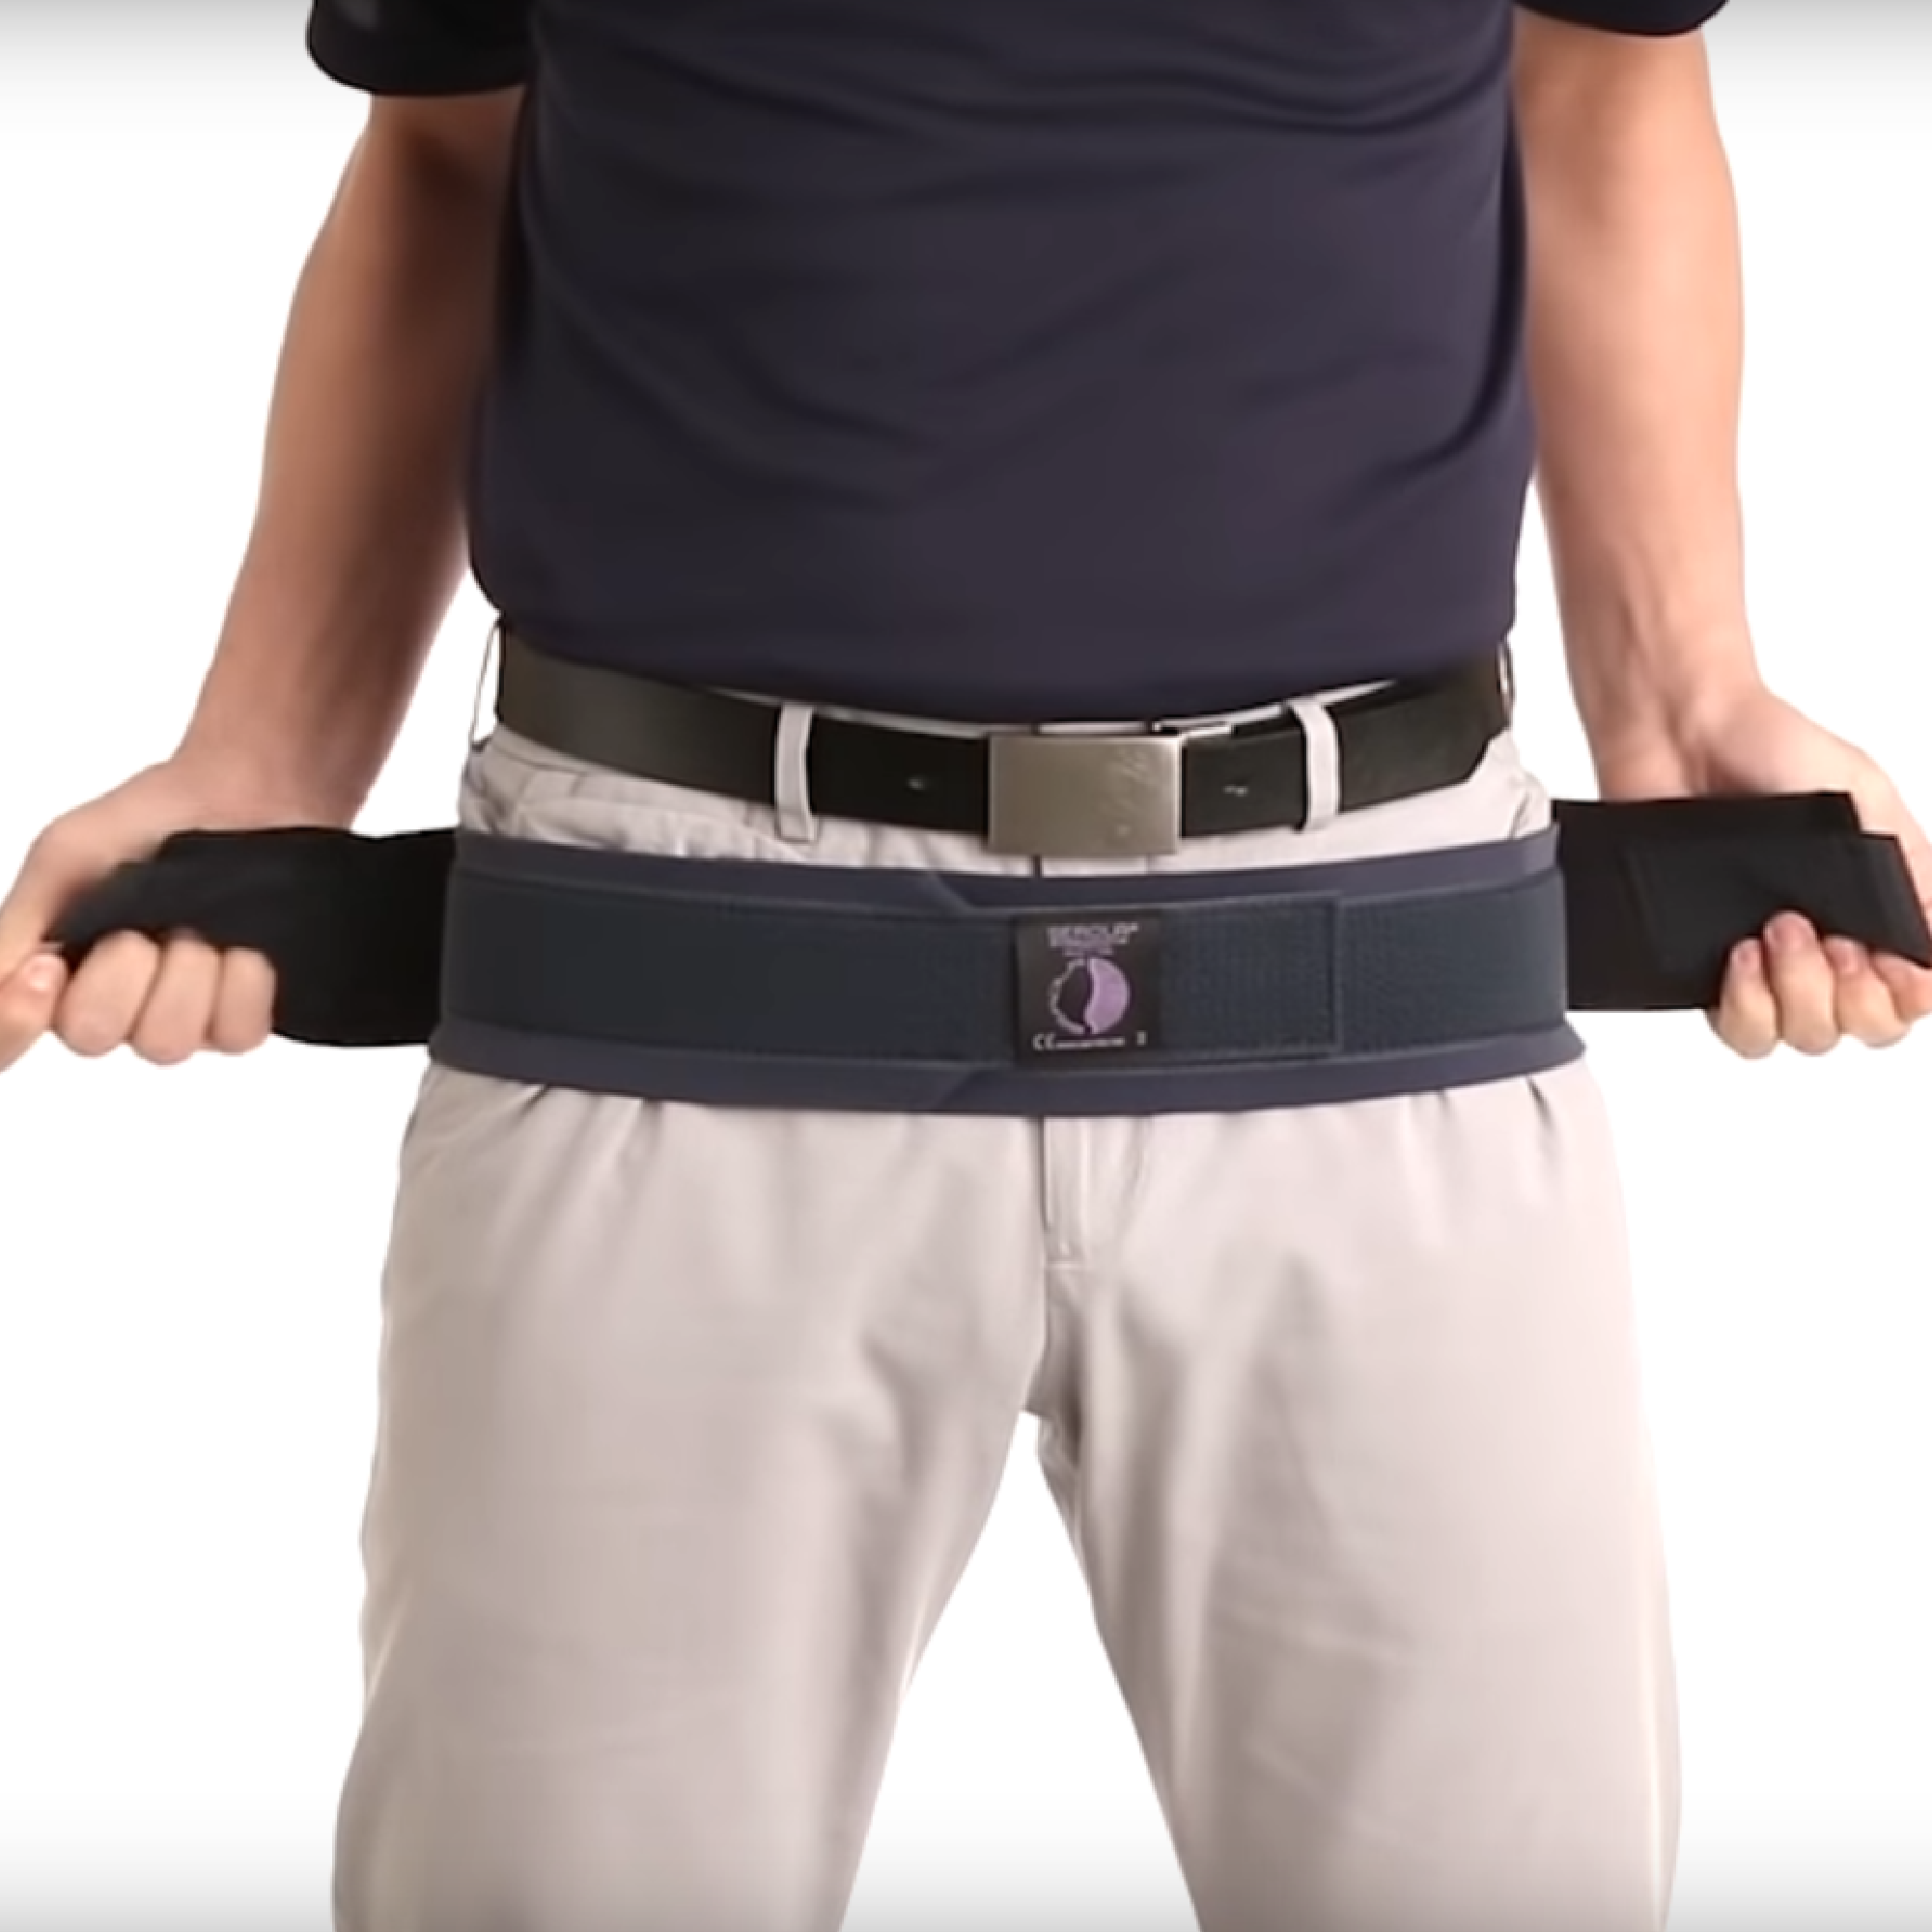 Hips / Groin - The Bone Store Support